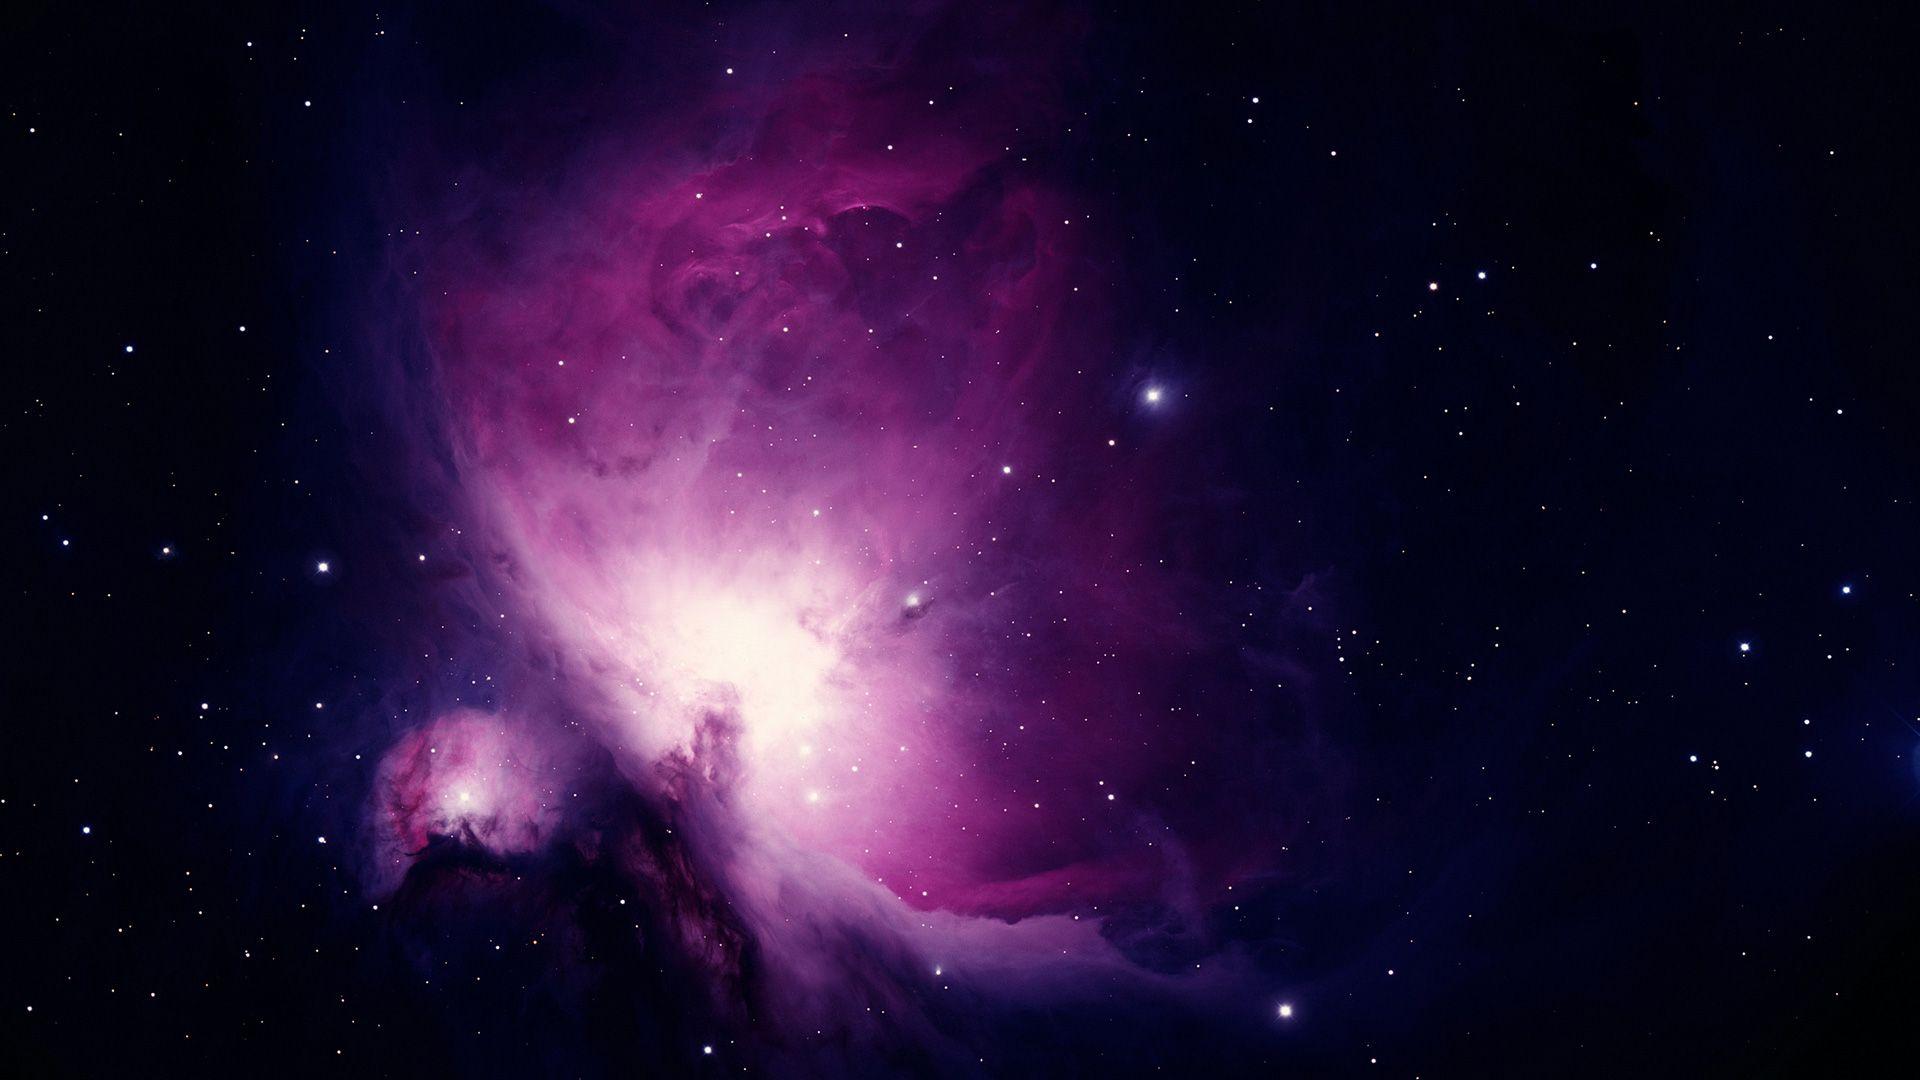 Galaxy Wallpapers 1920x1080